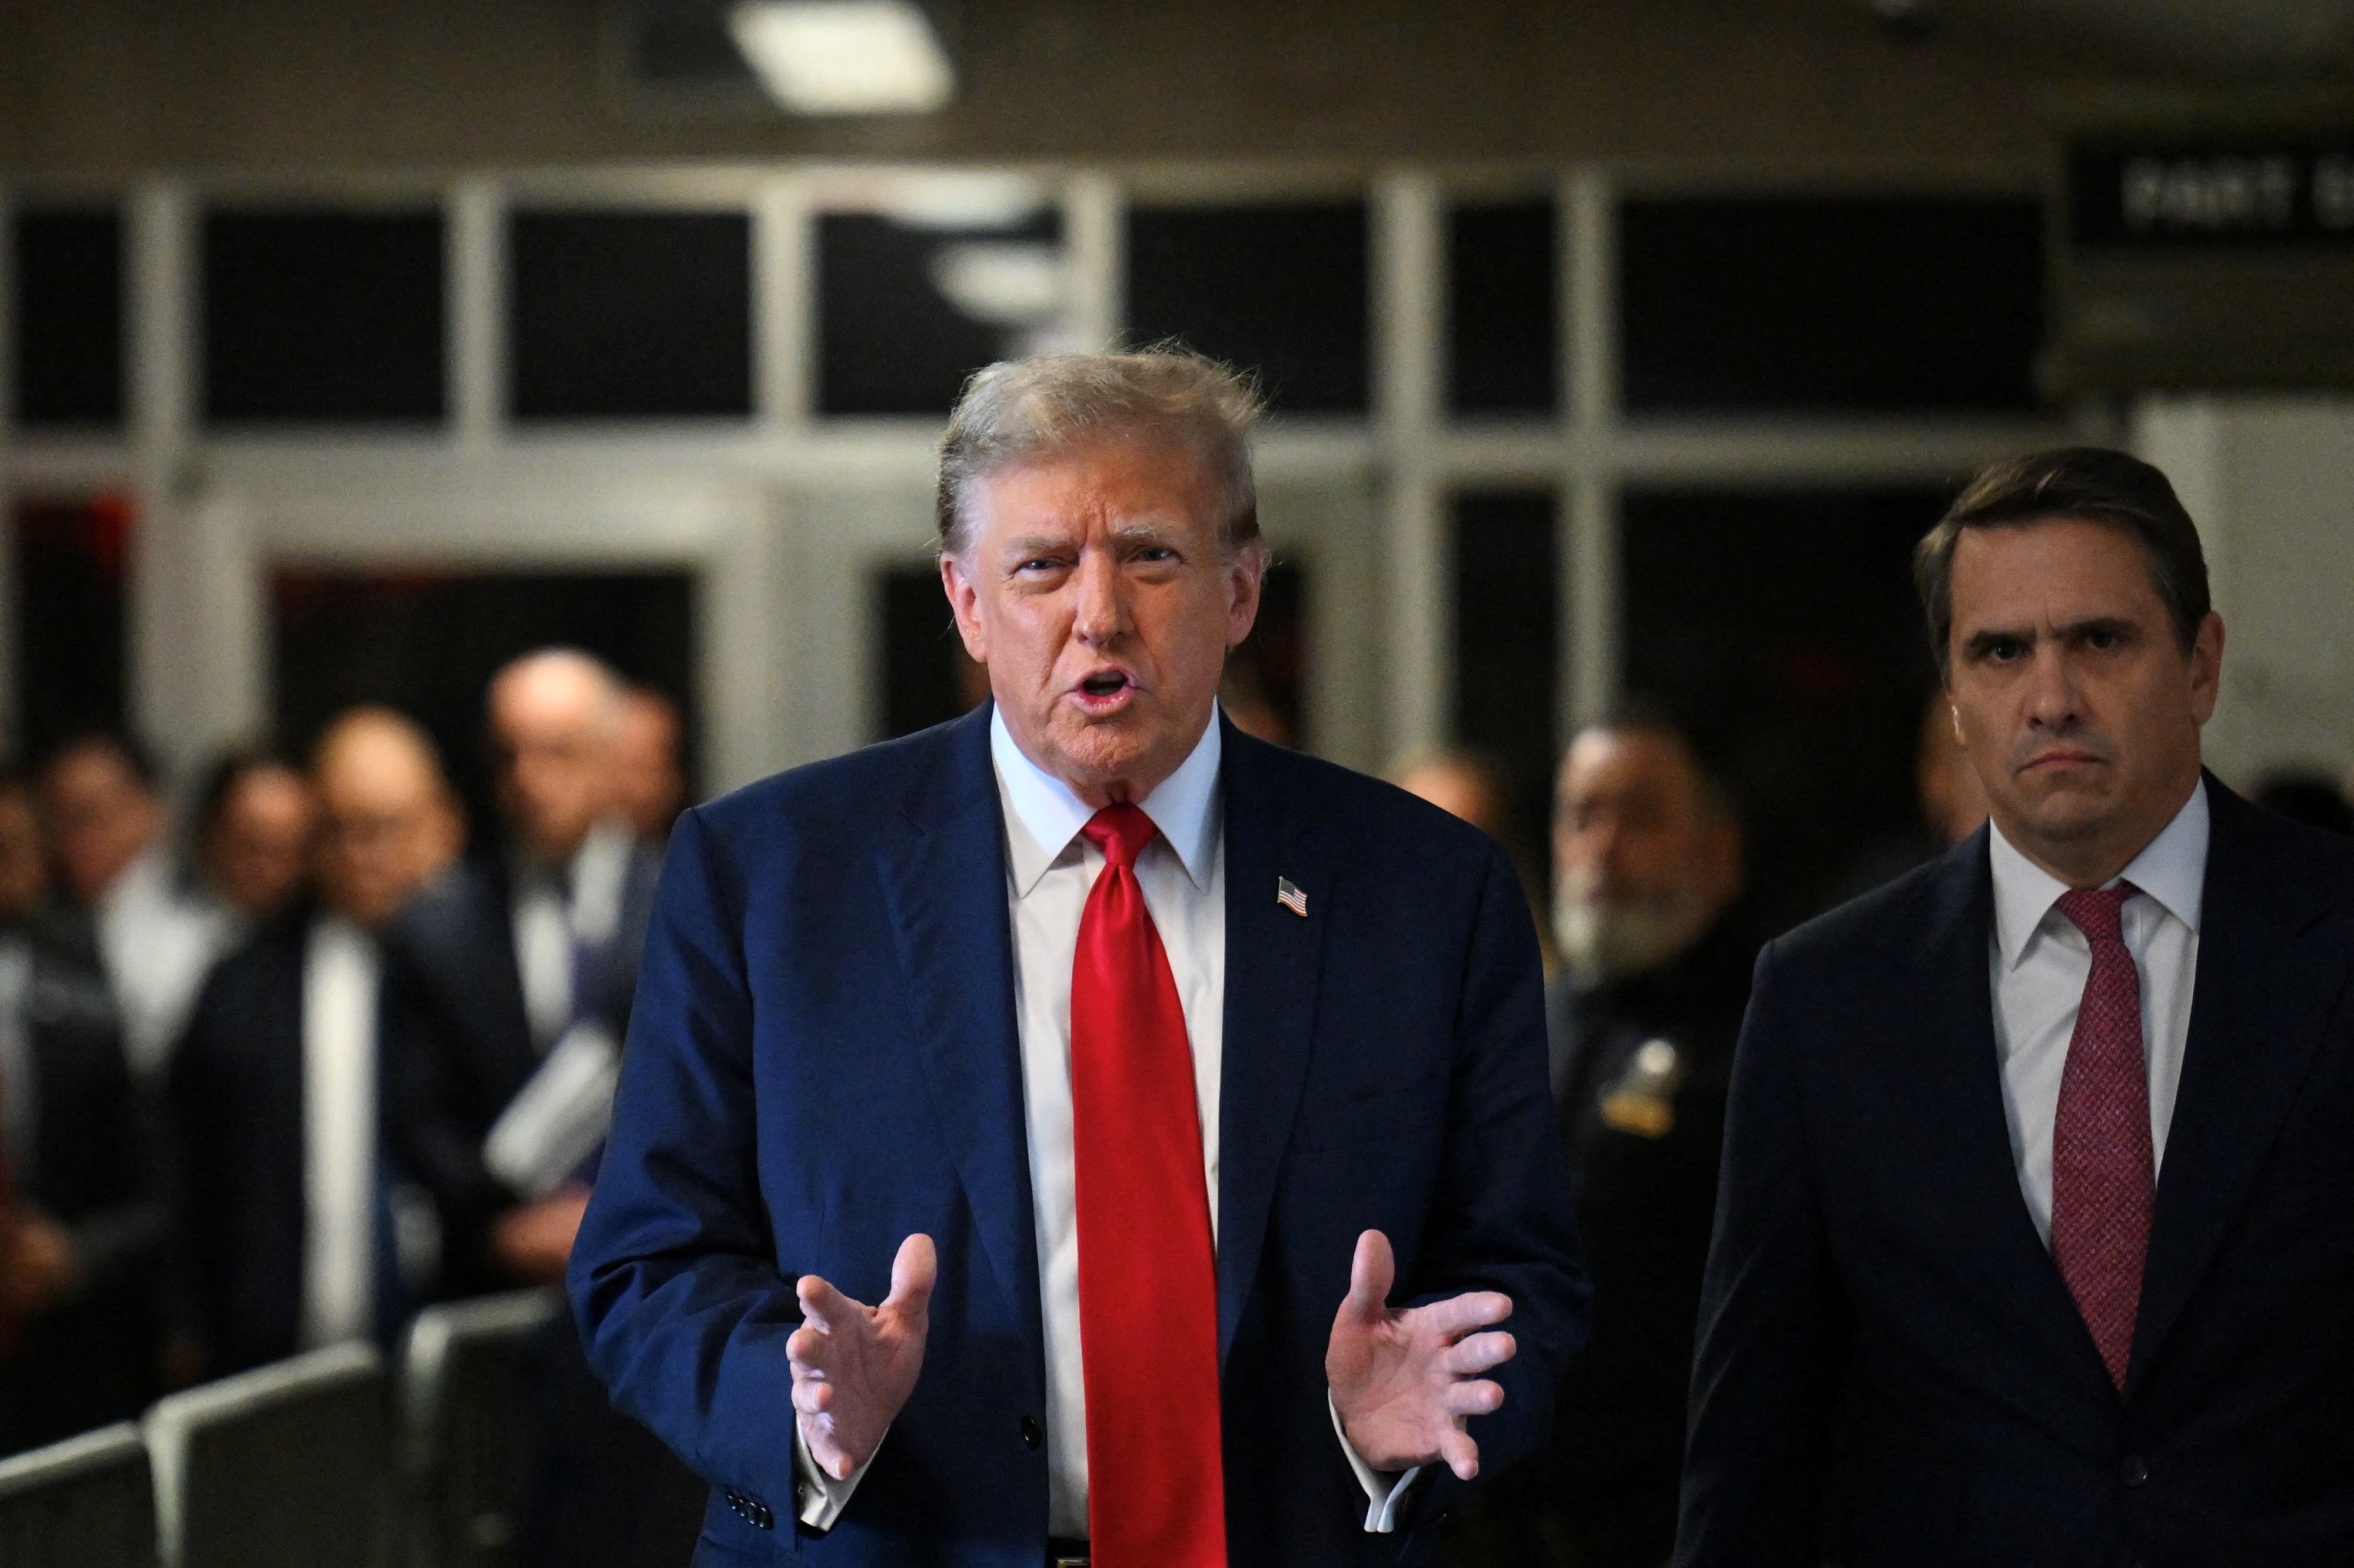 Donald Trump in suit with red tie walks with an unidentified man in the background